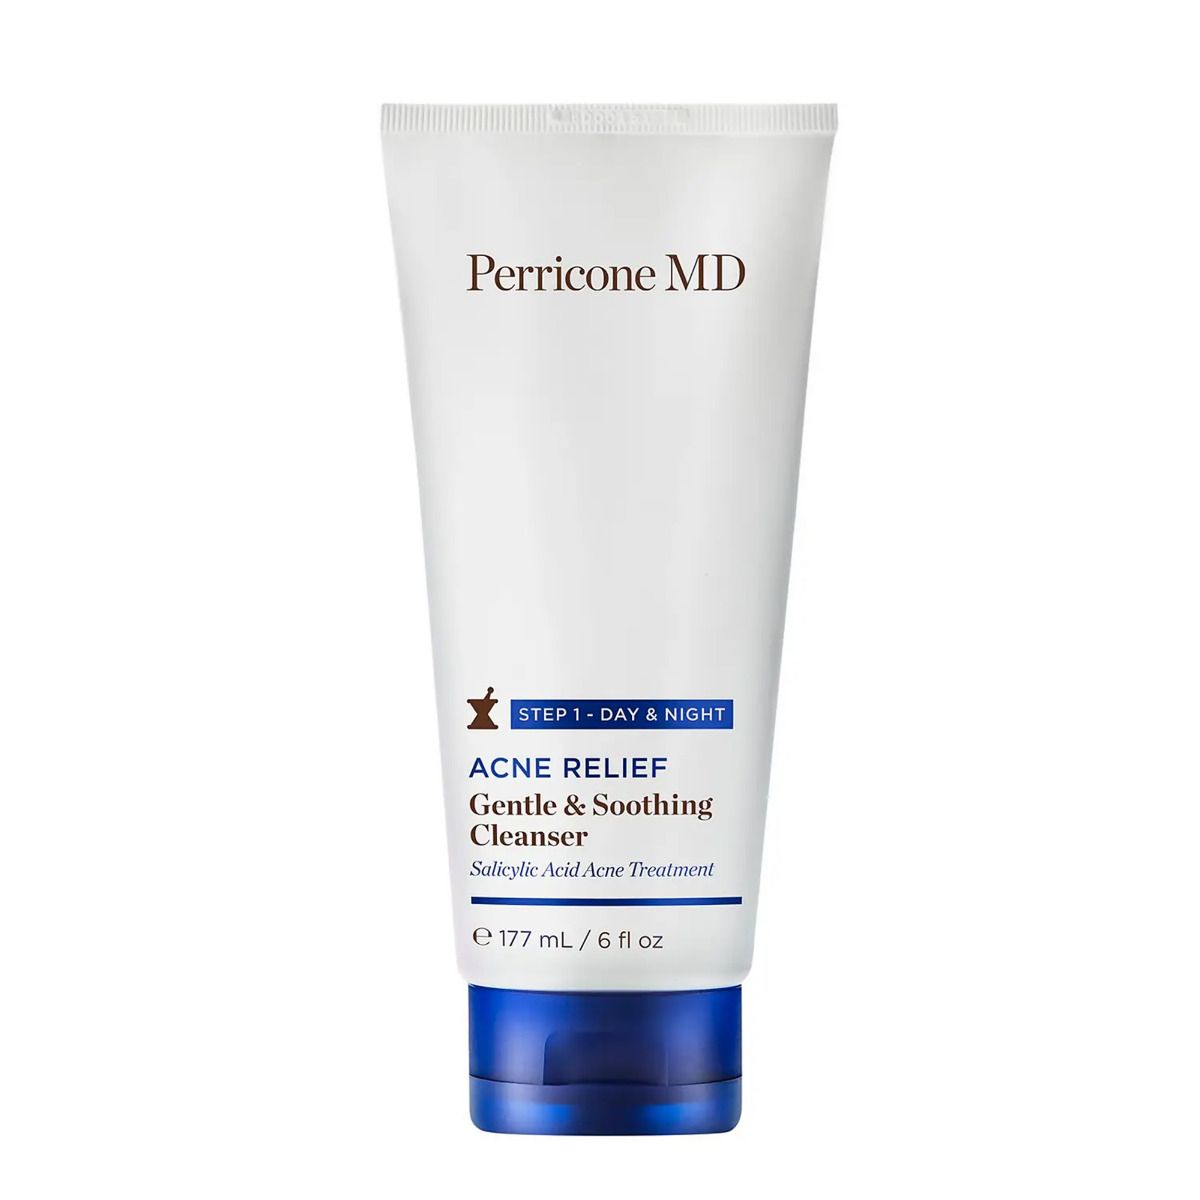 Perricone MD Acne Relief Gentle & Soothing Cleanser